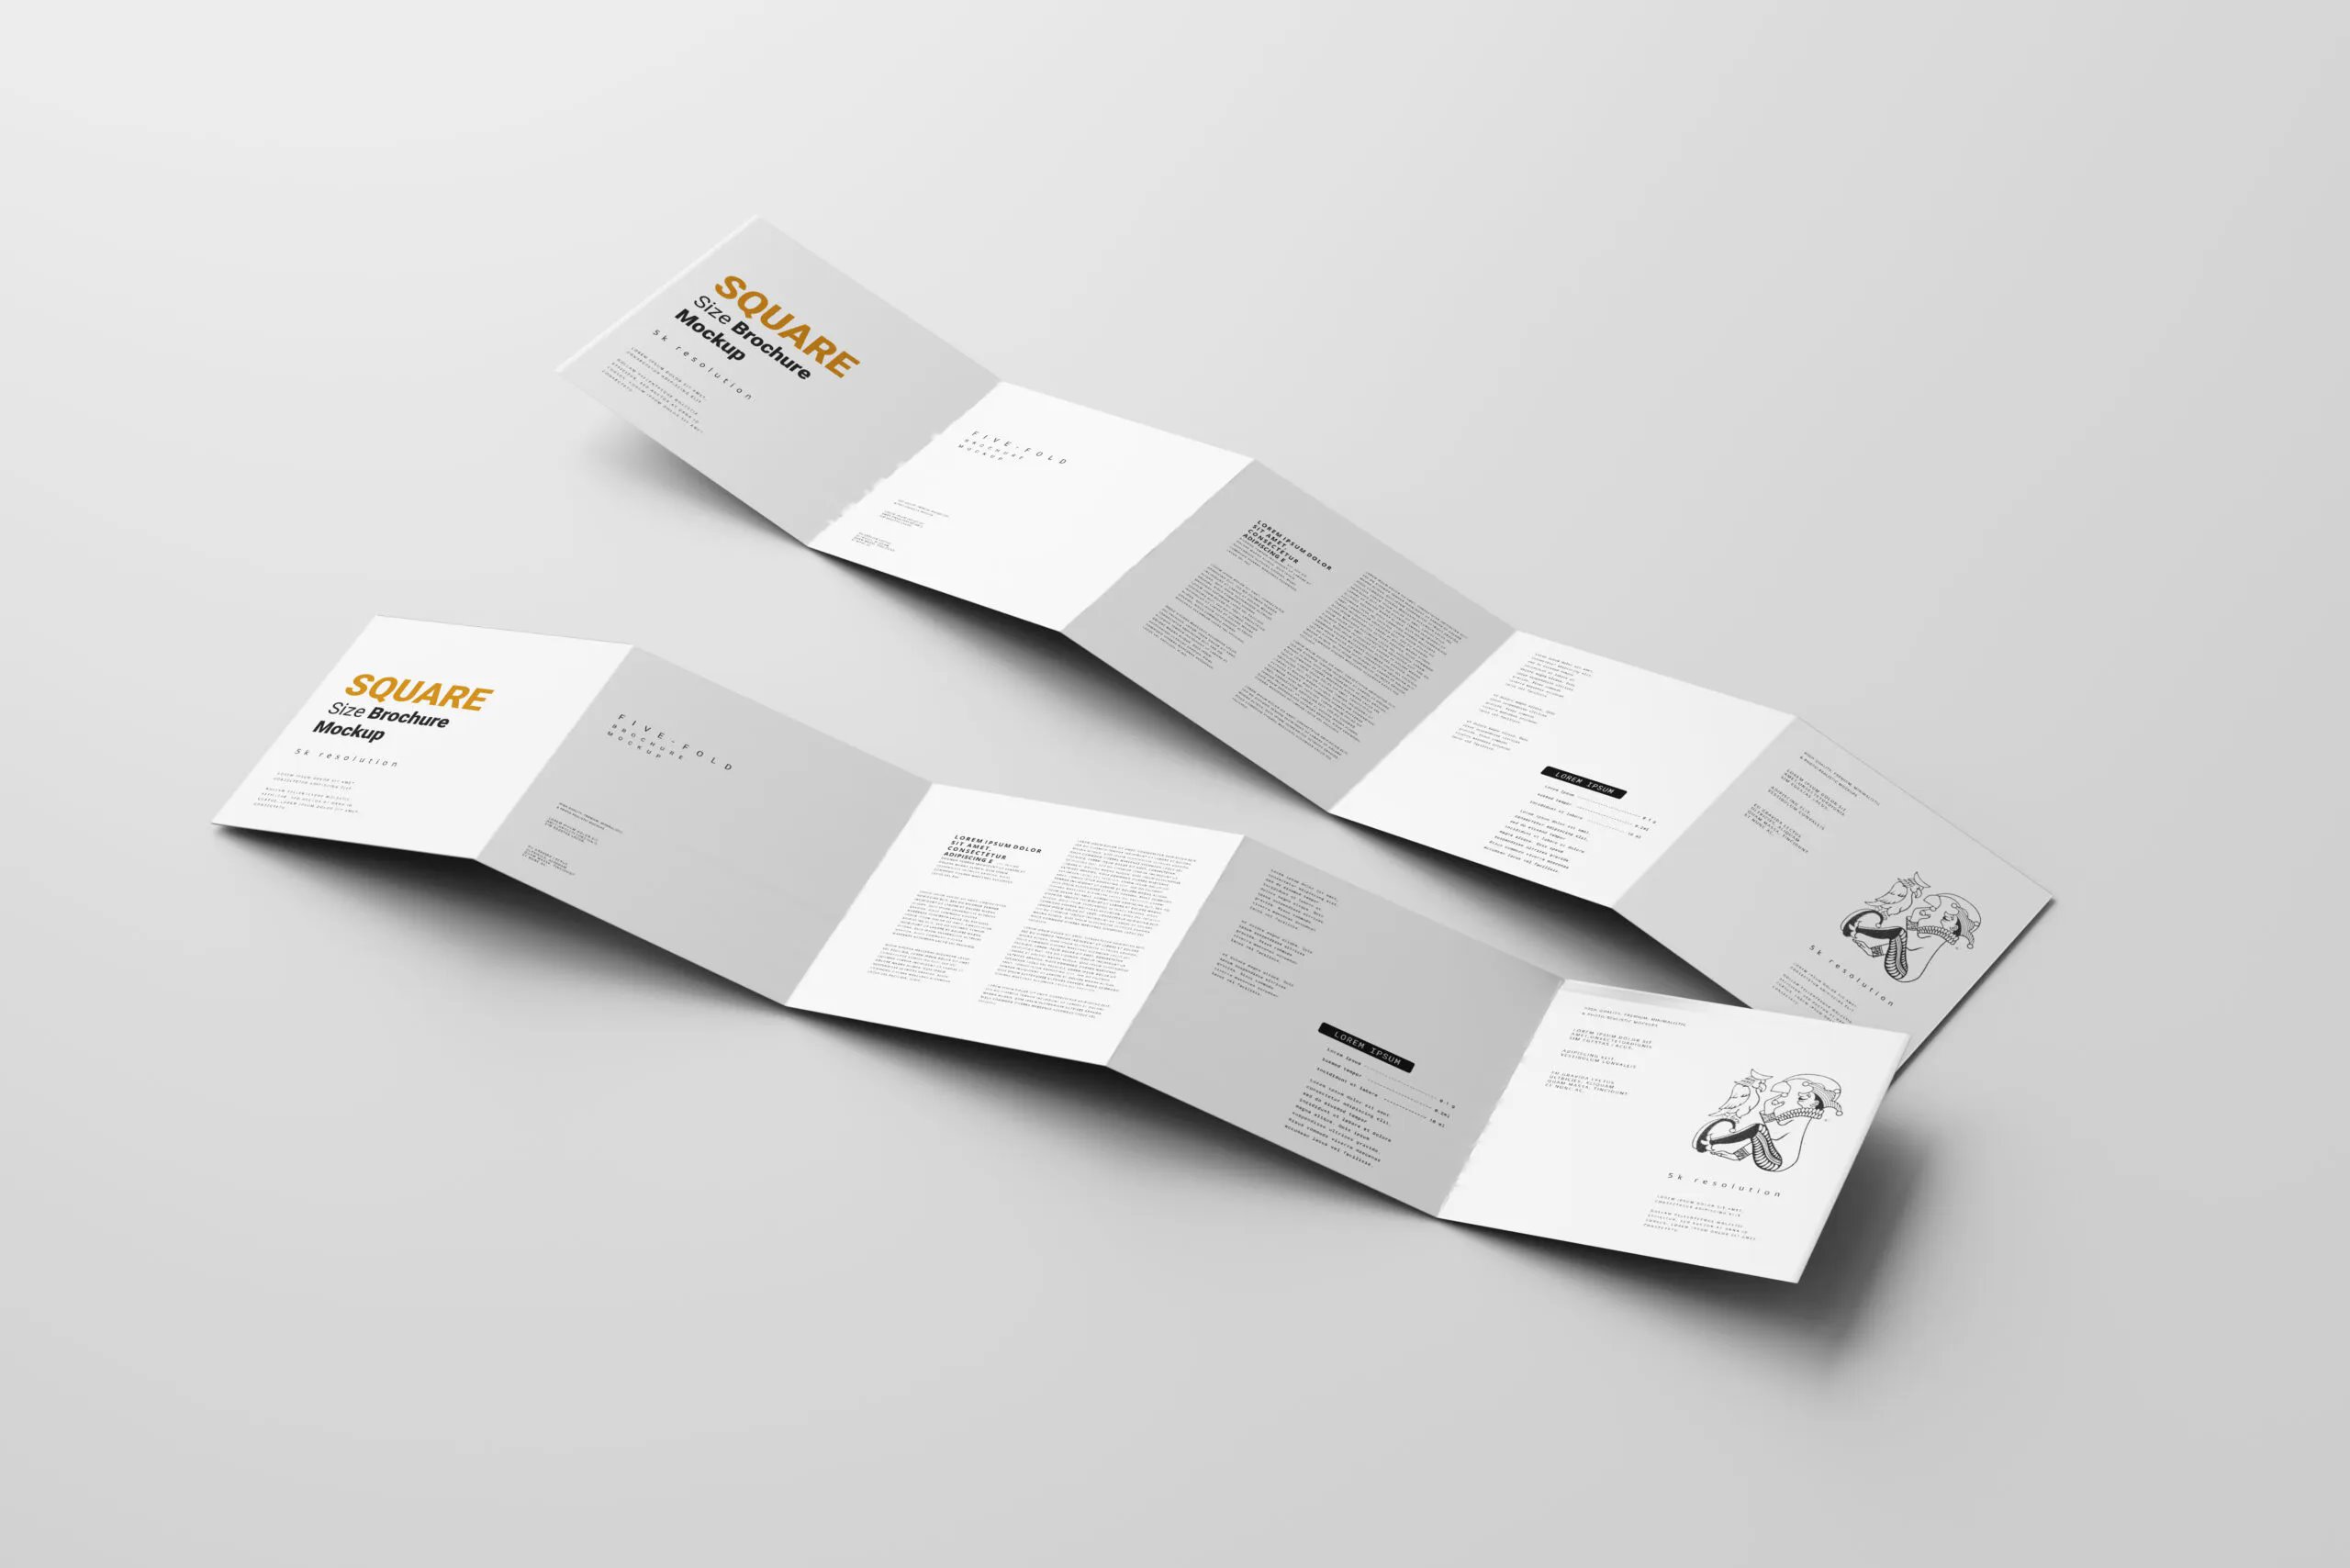 Different Views of 5 Five-Fold Square Brochures Mockups FREE PSD